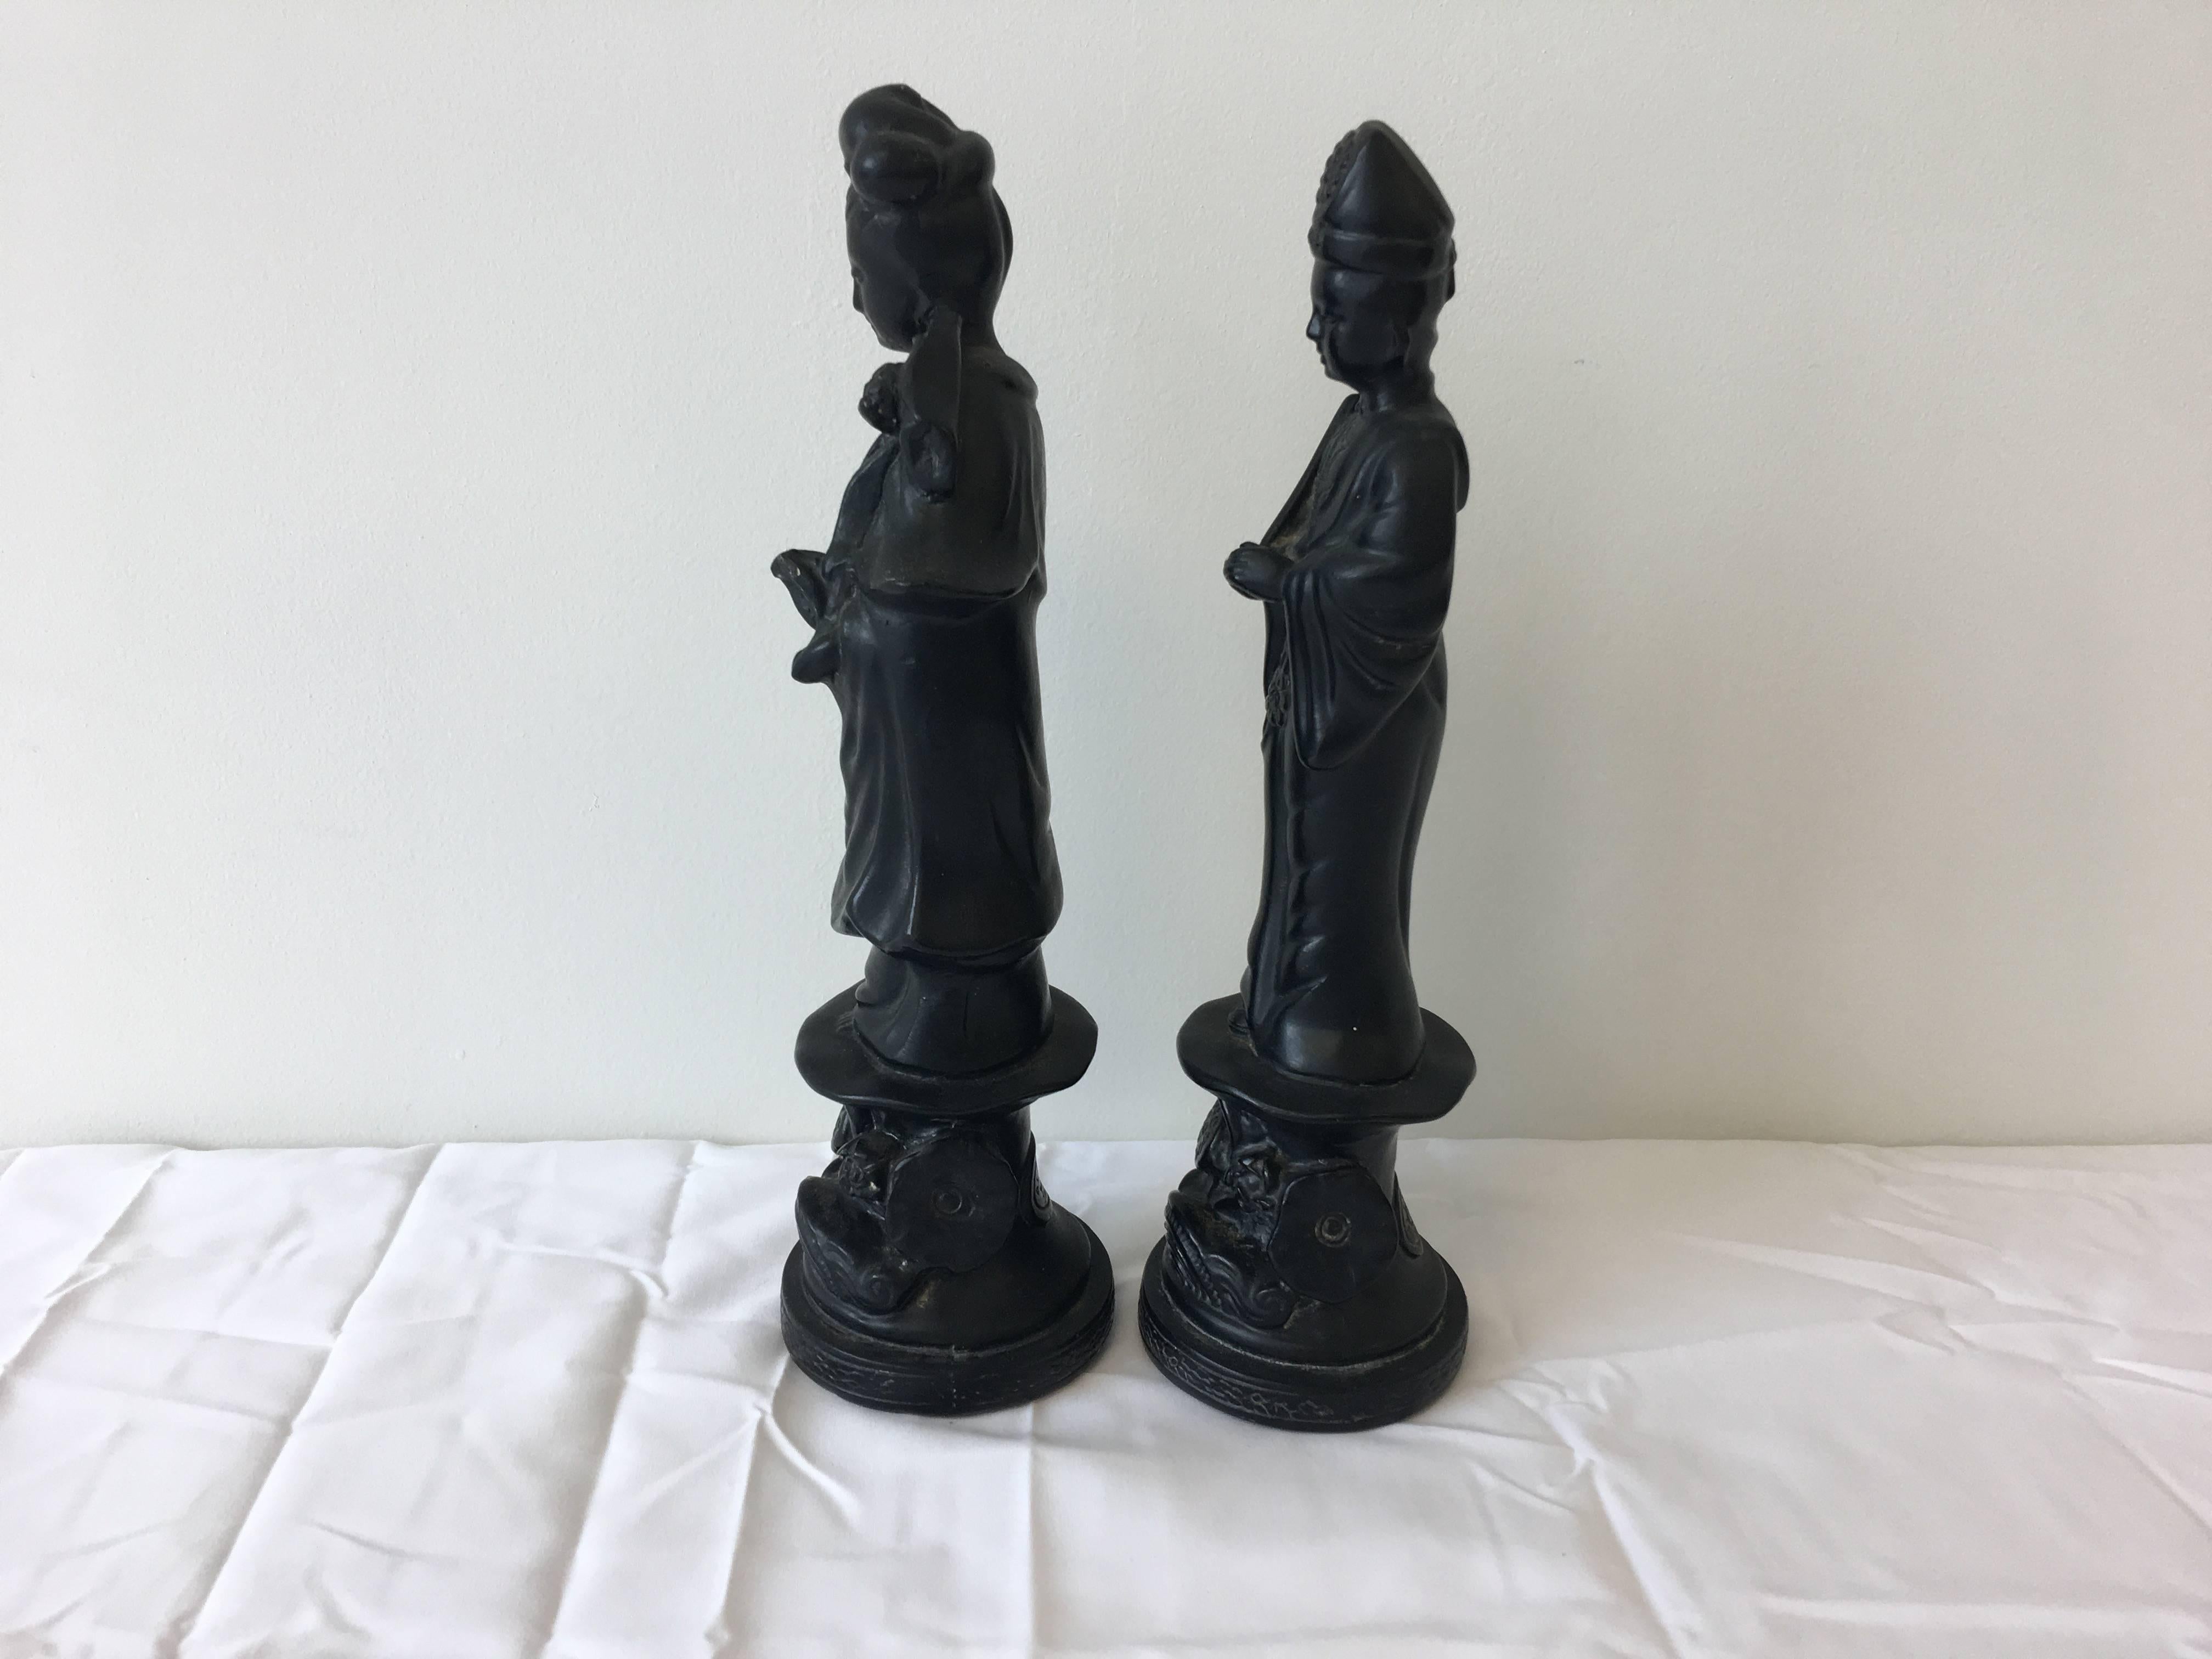 Dyed Black Plaster Asian Figurines by Alexander Backer, Pair